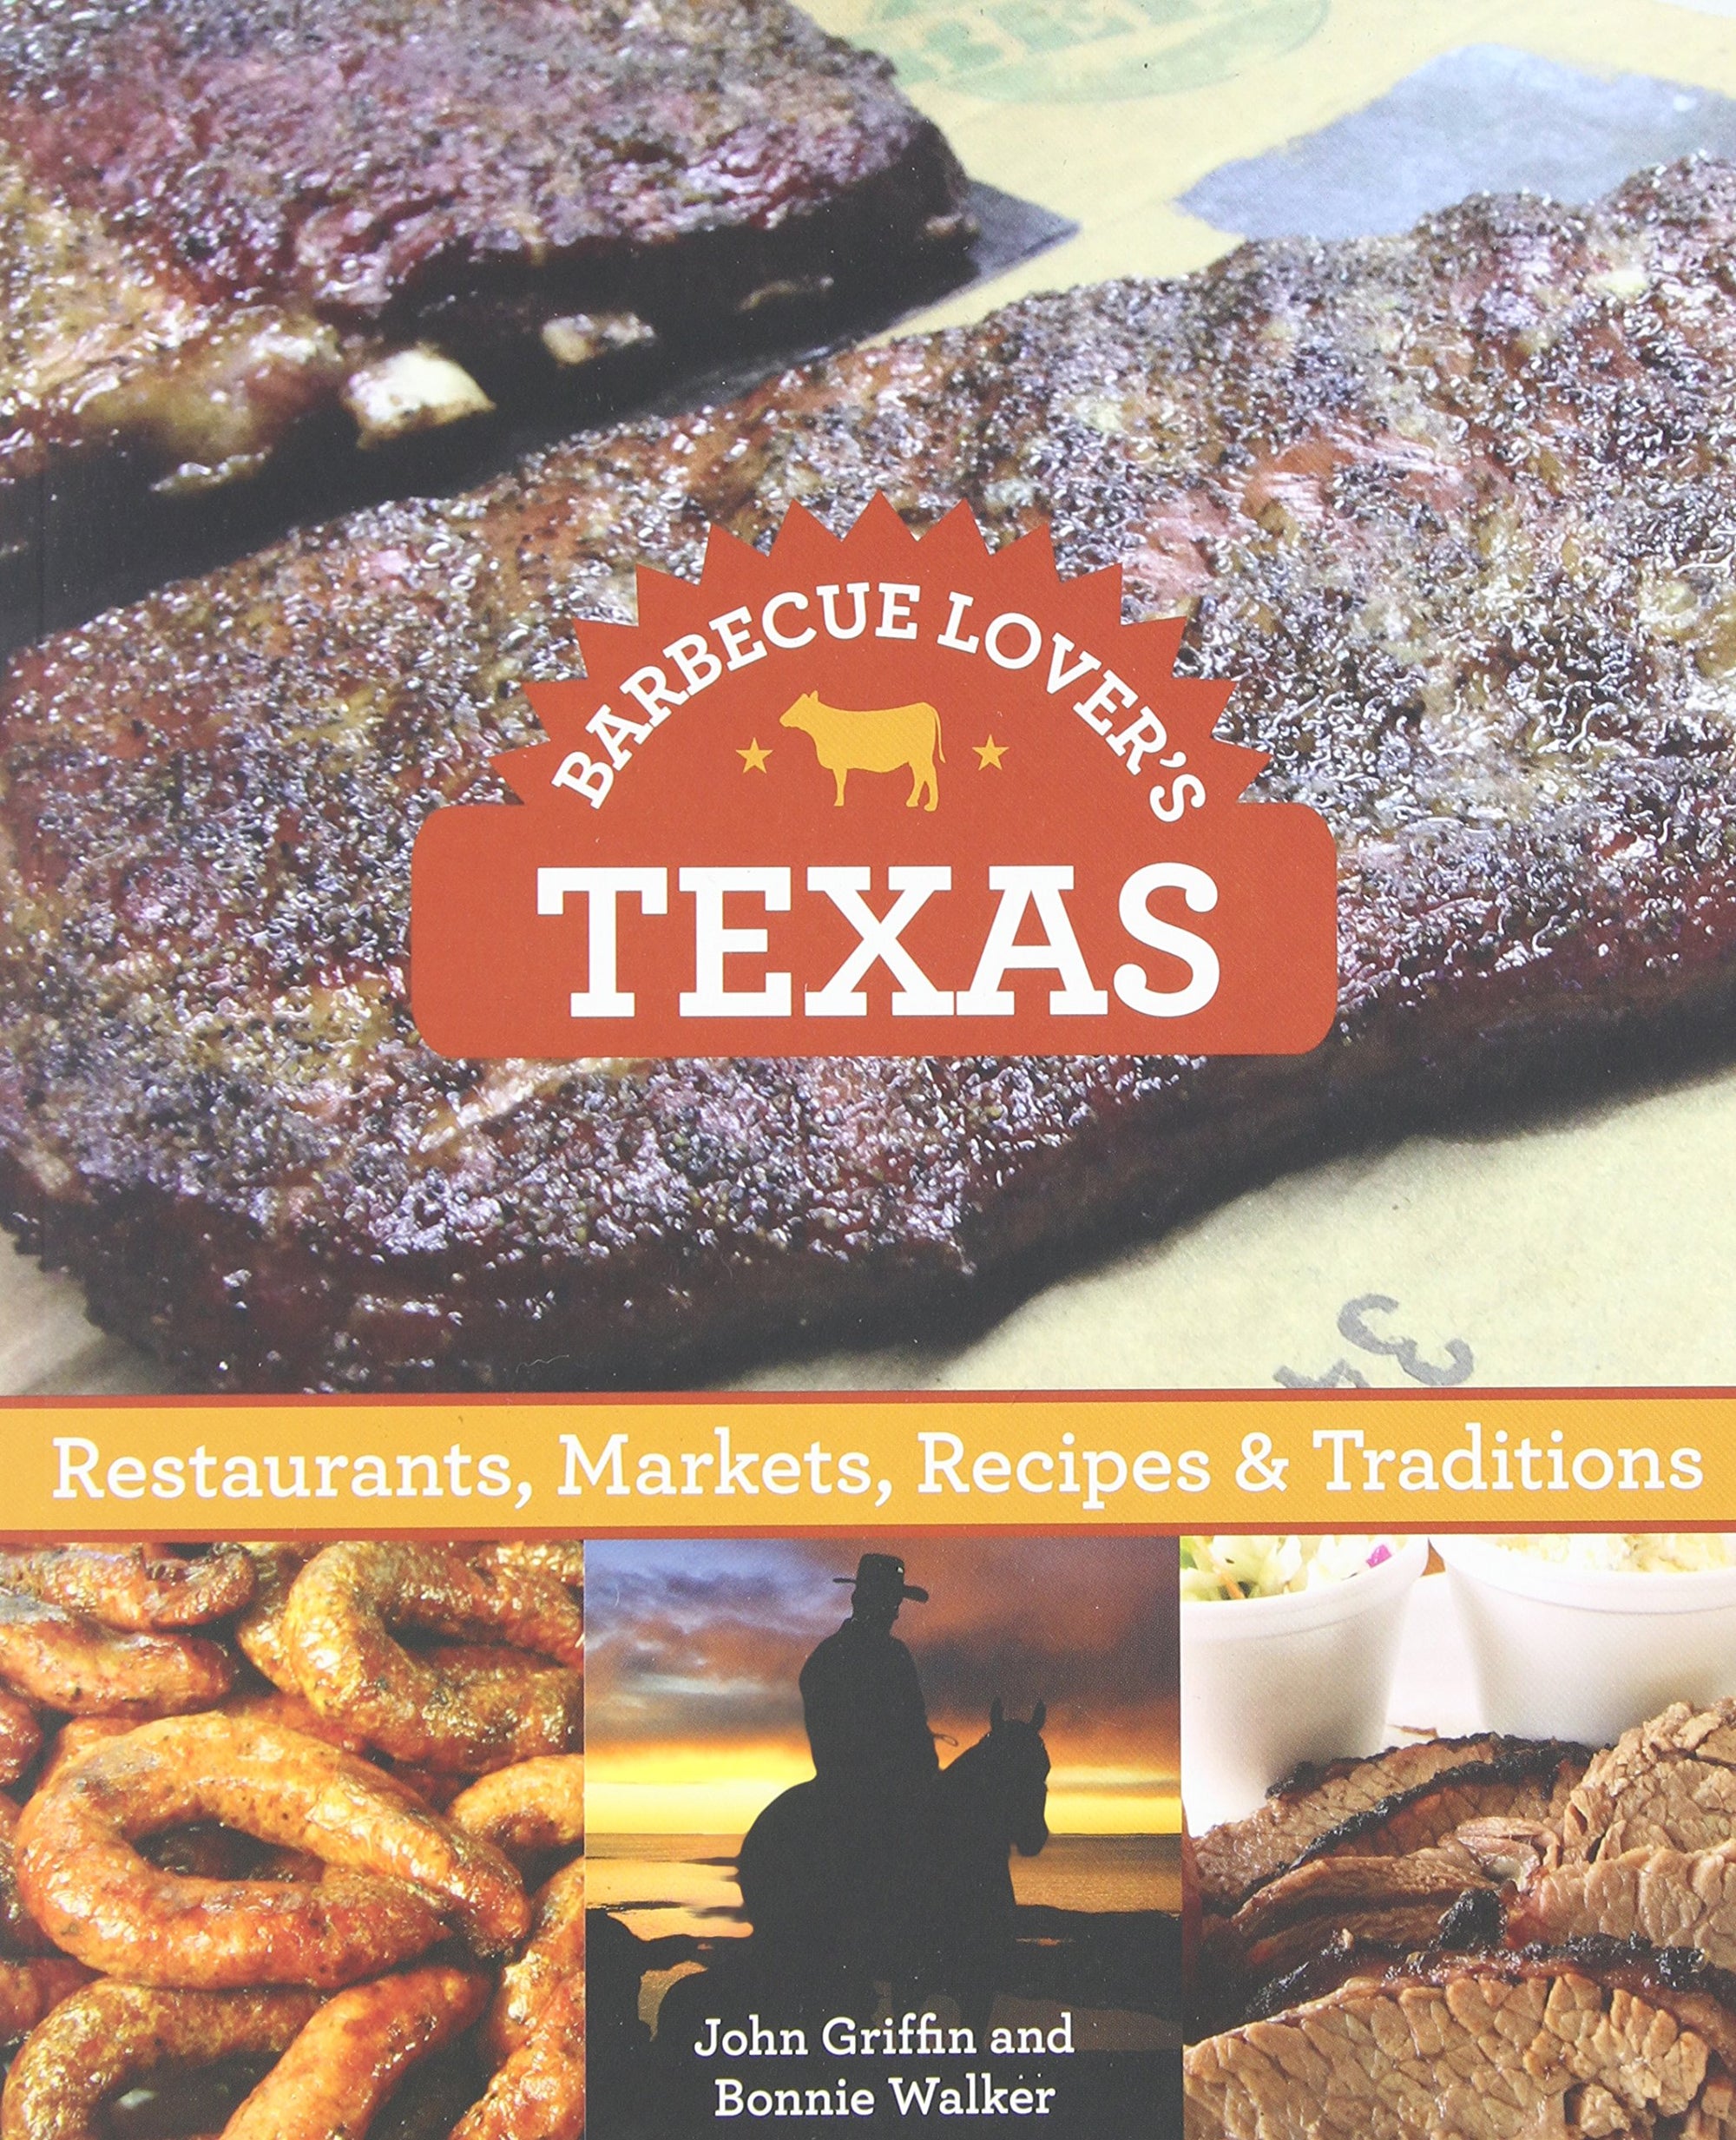 Book - Barbecue Lovers: Texas